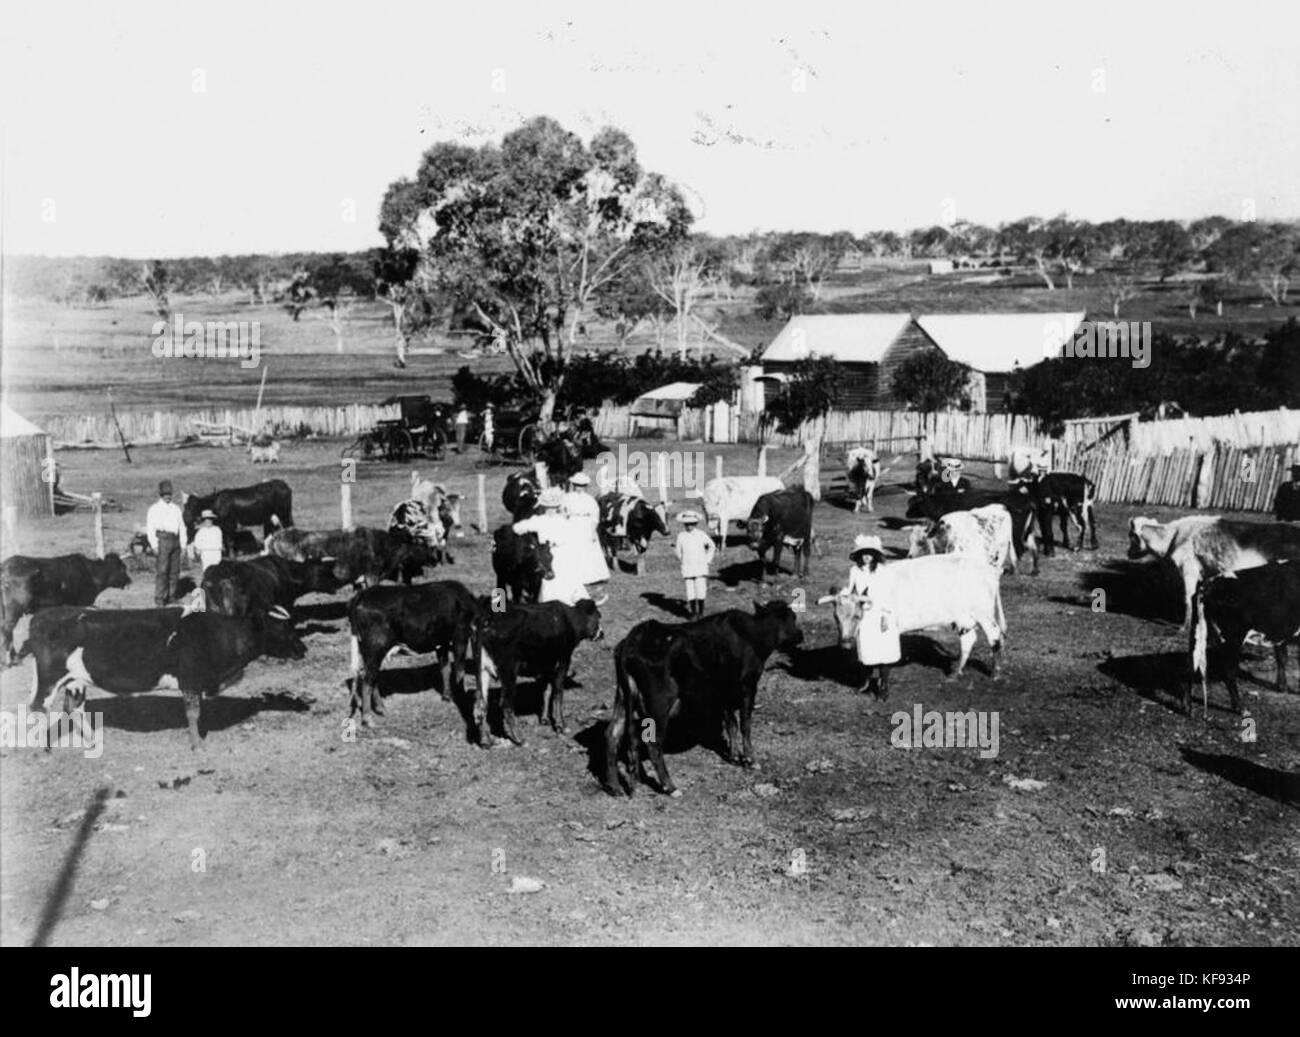 1 118652 Parade of dairy cattle at 'Springside' in the Pittsworth ...